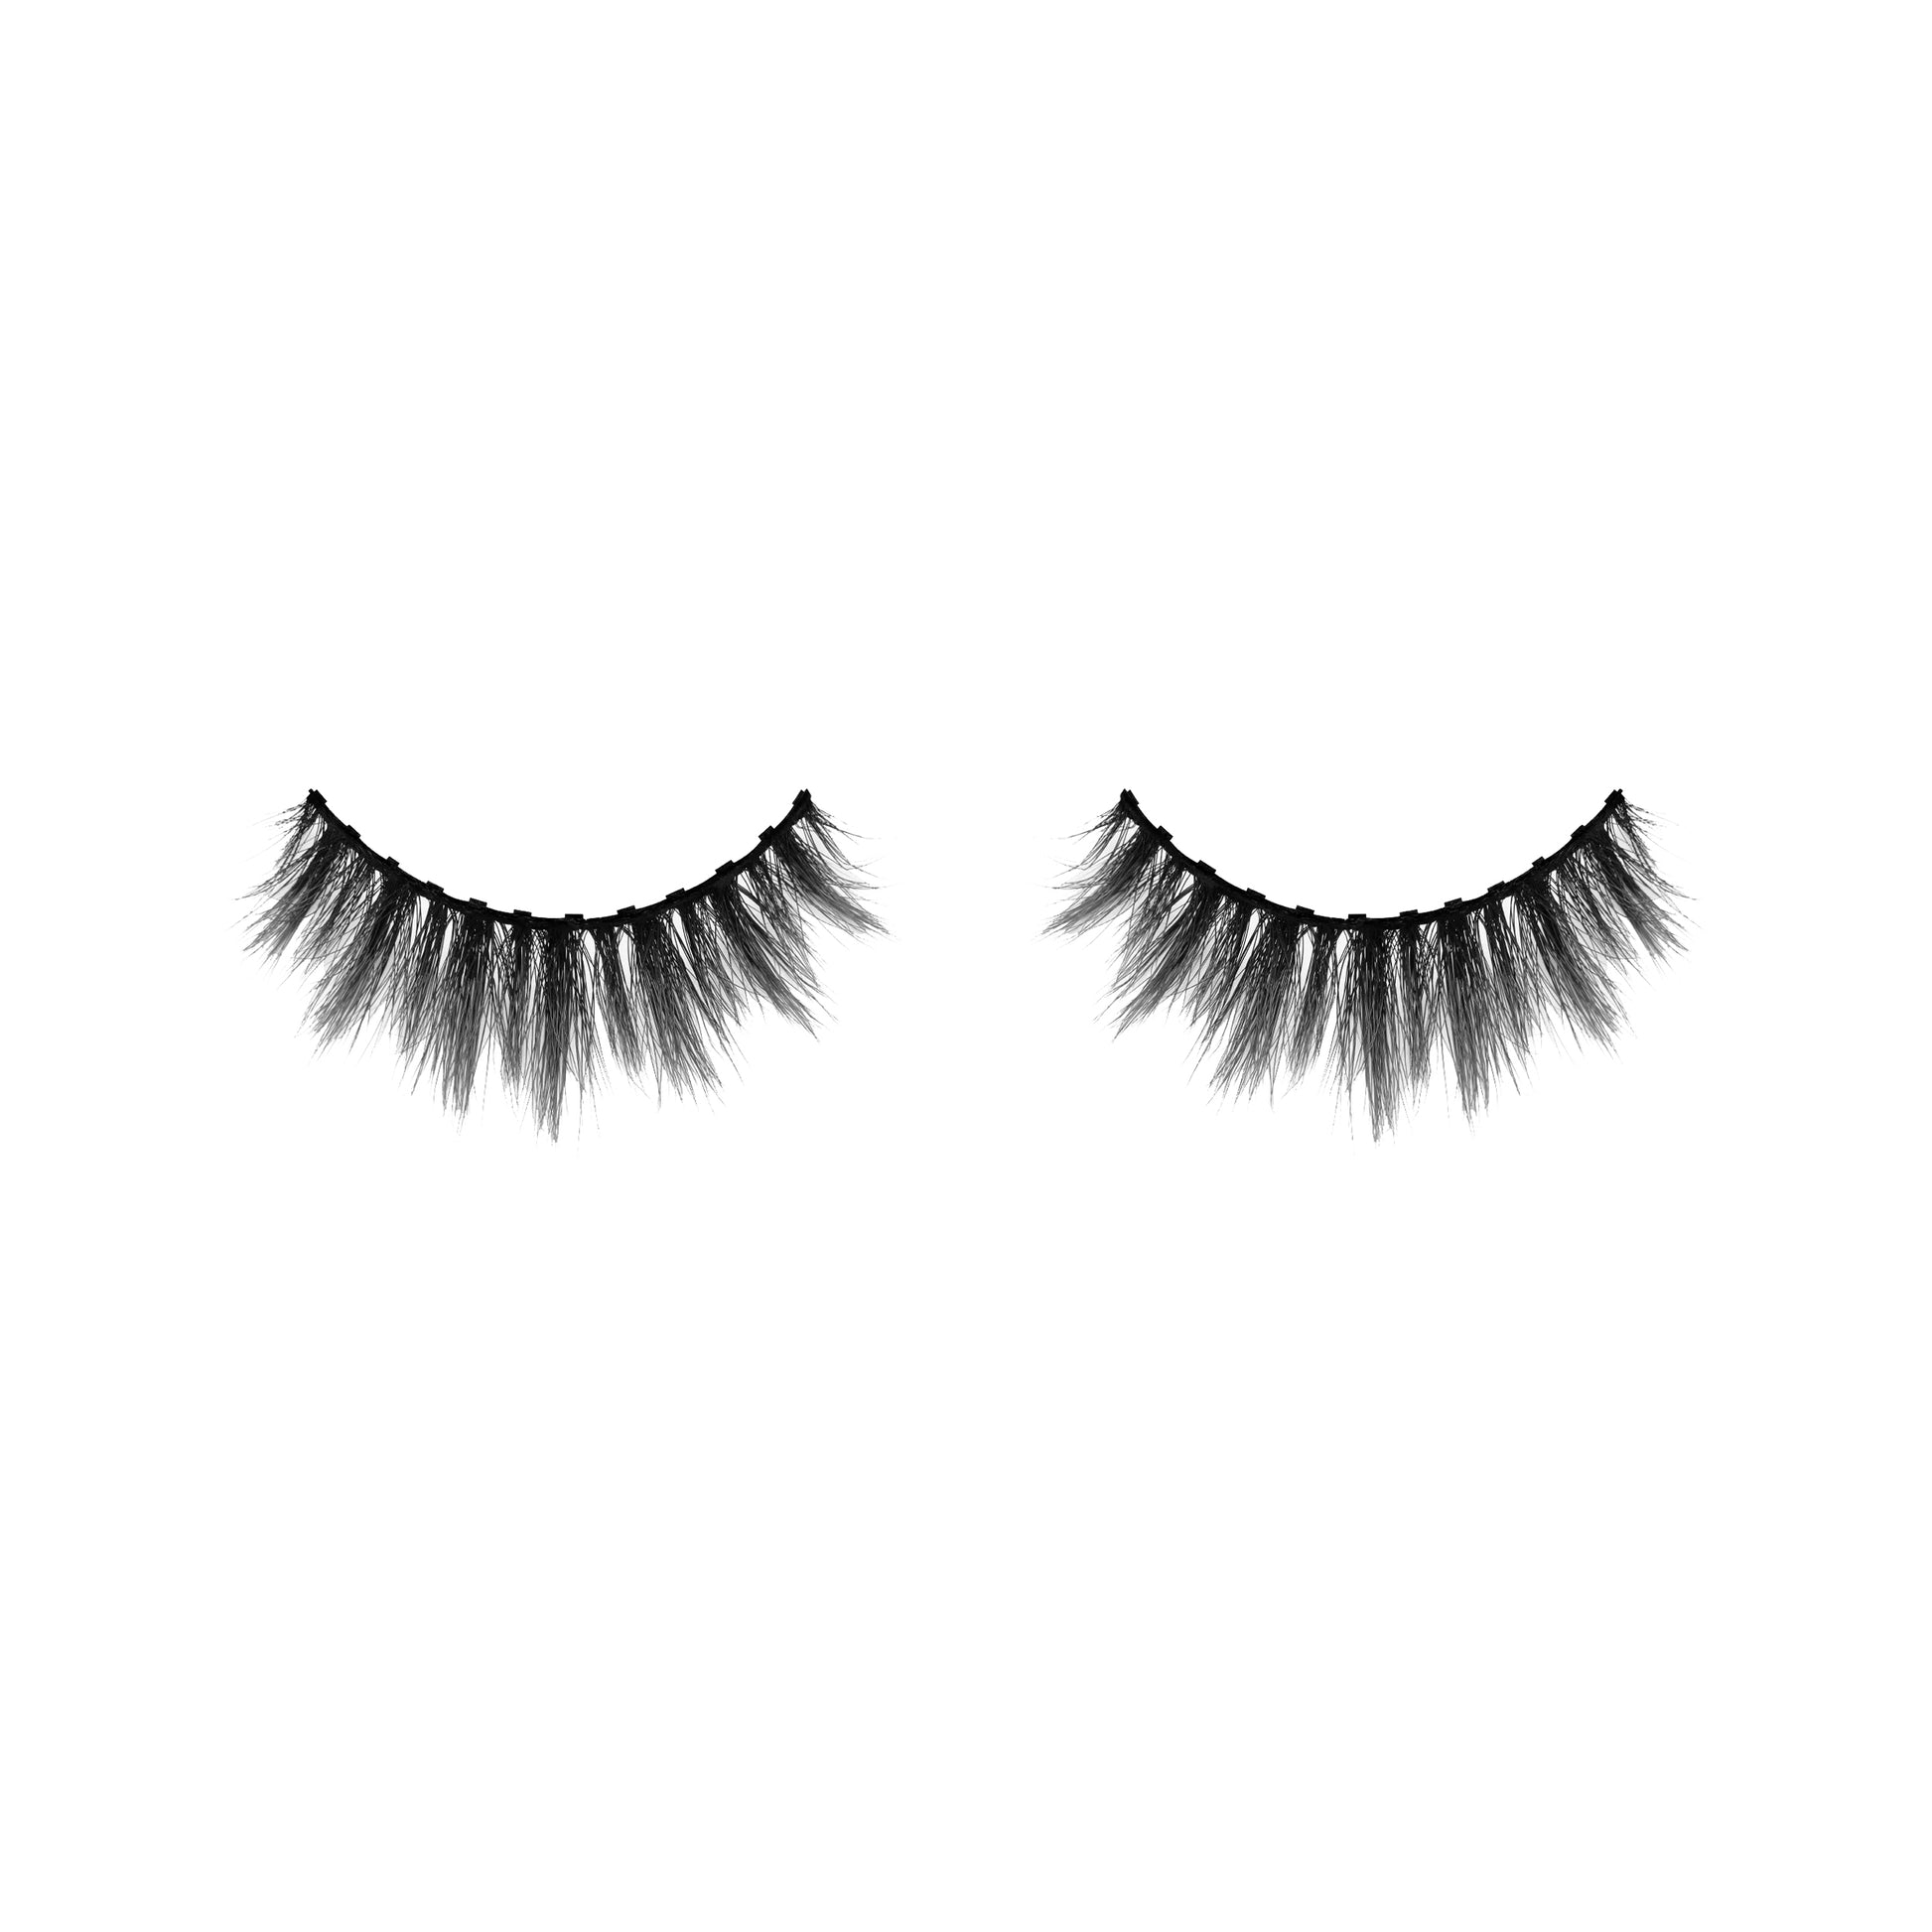 Lilly Lashes Click Magnetic Lashes Magnetic Miami